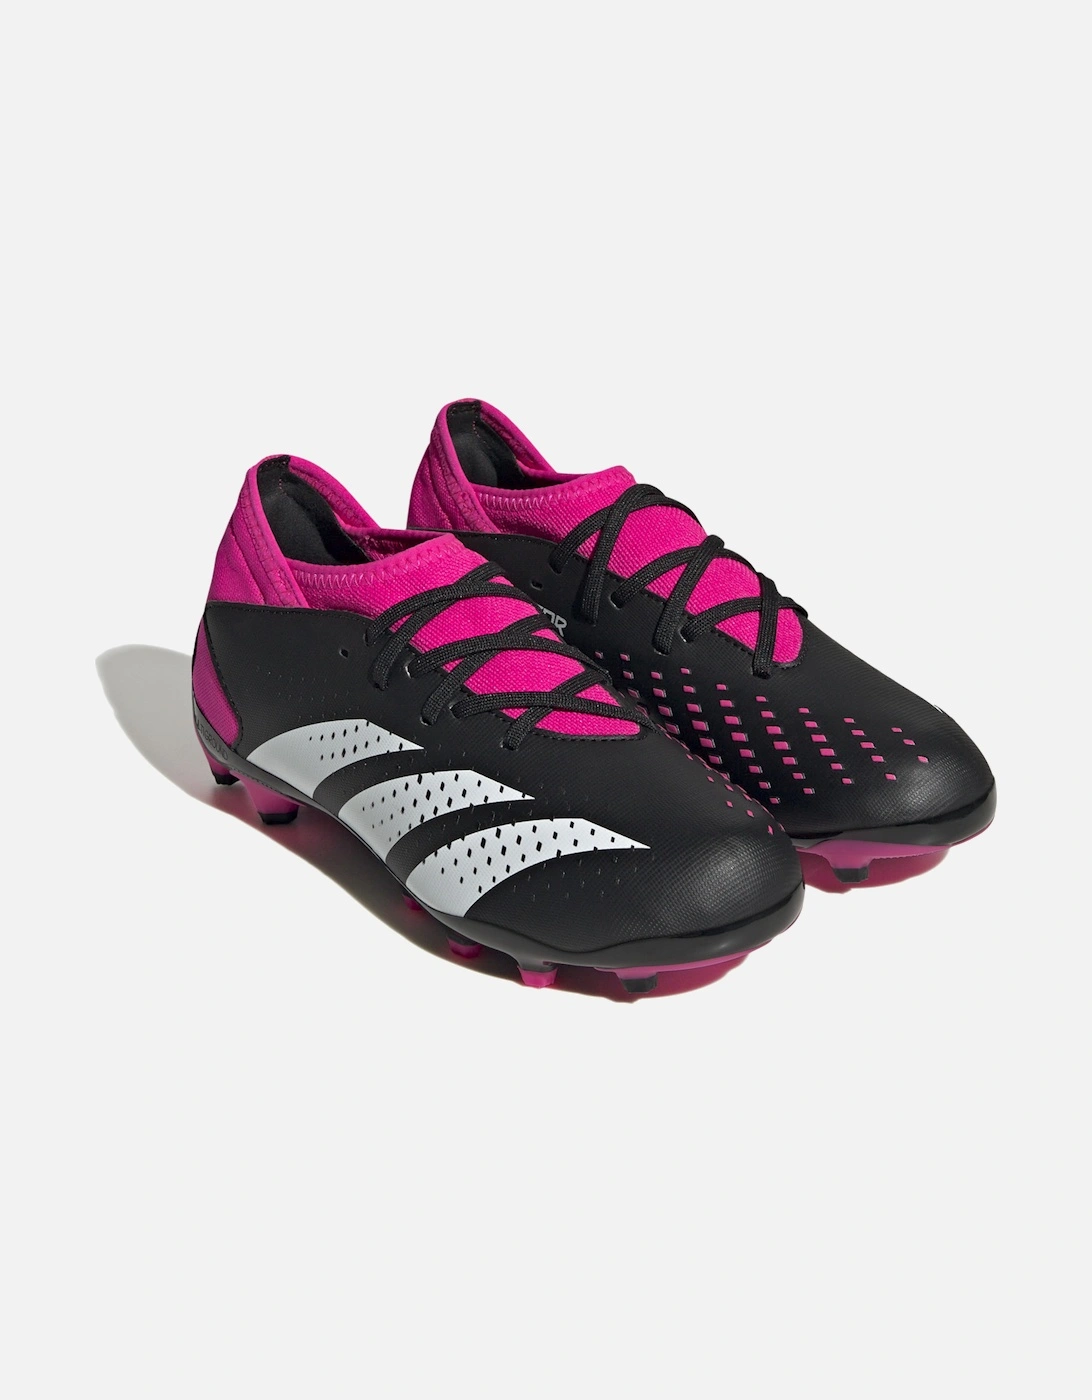 Youths Predator Accuracy.3 Football Boots (Black/Pink)